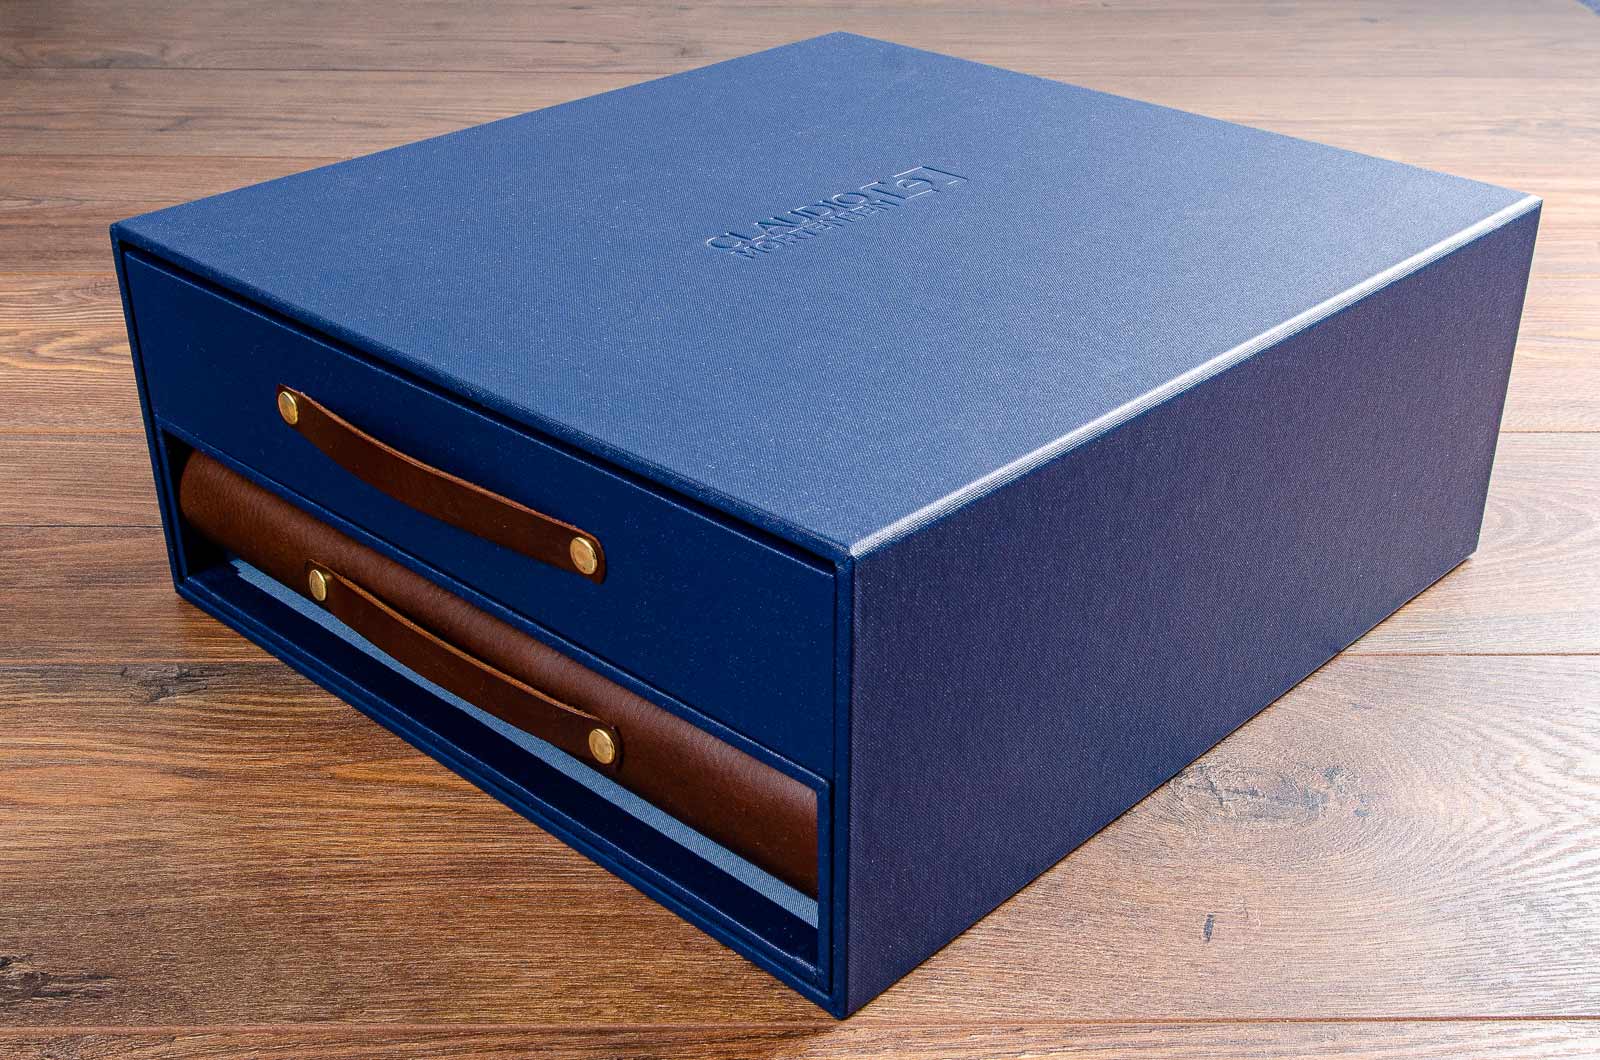 Portfolio box with drawer and leather portfolio book. Products are double slipcase with drawer and leather screw post binder. Personalisation is blind deboss on box cover